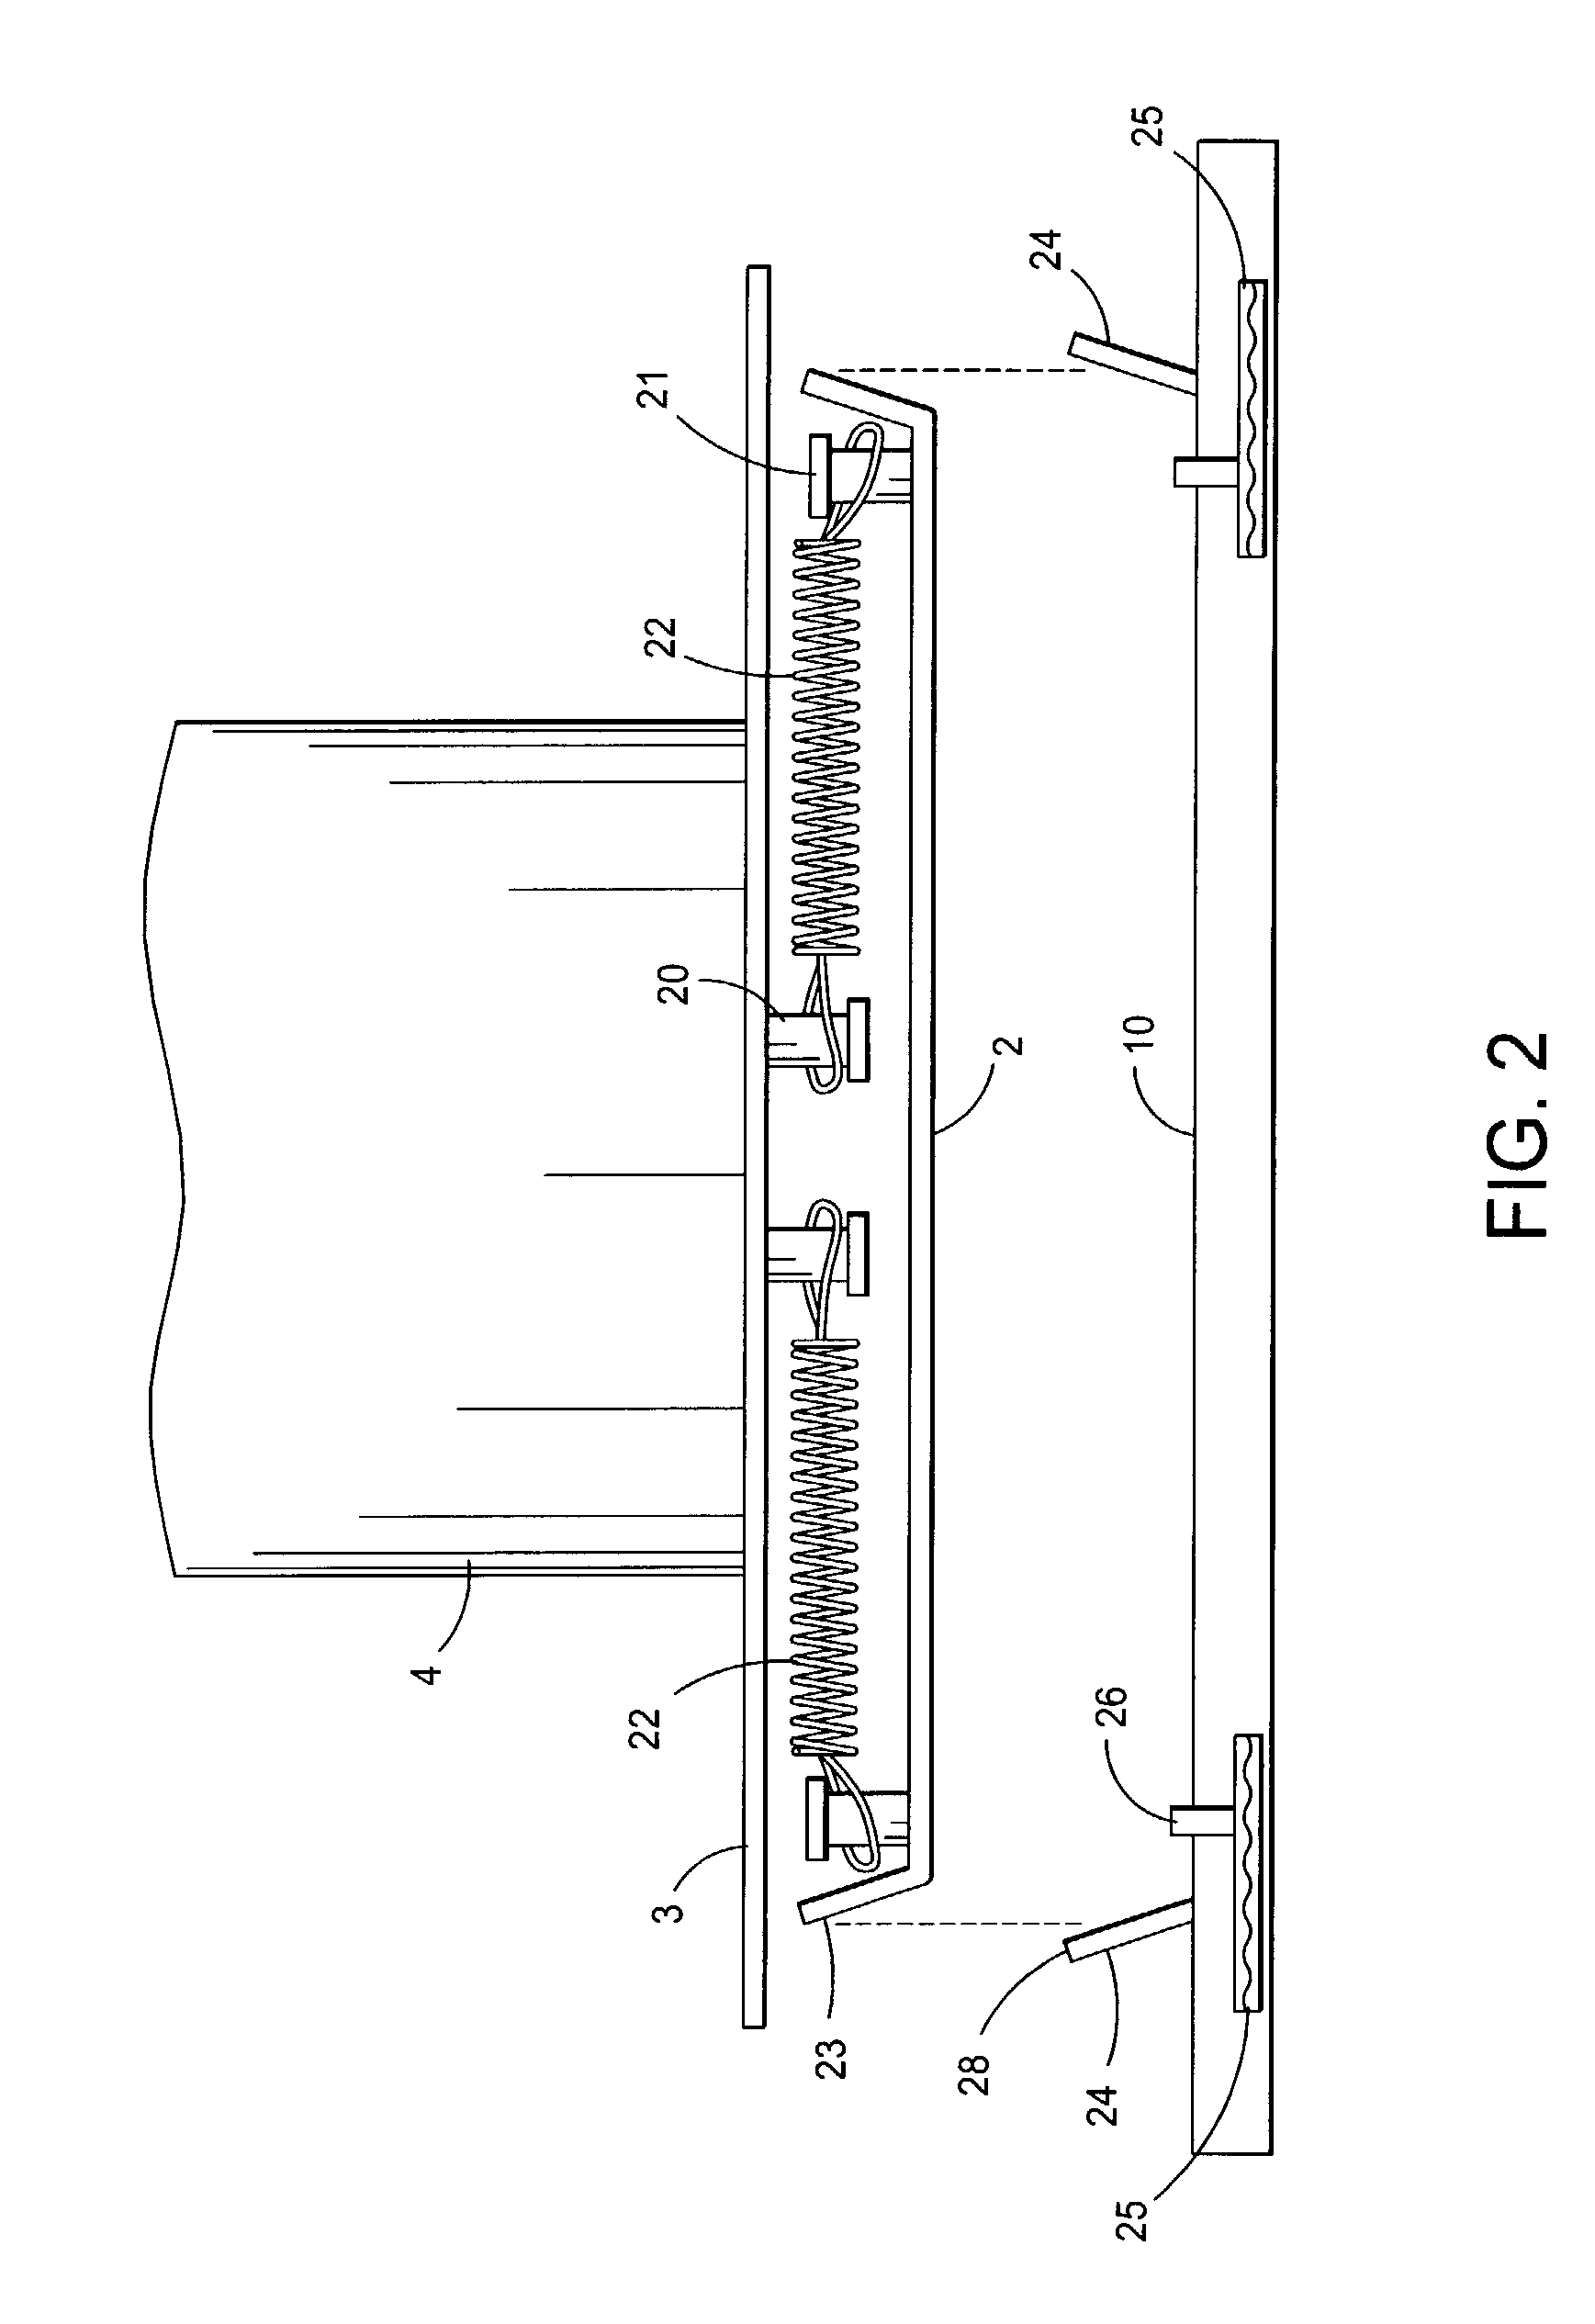 Carpet cleaning apparatus and method with vibration, heat, and cleaning agent